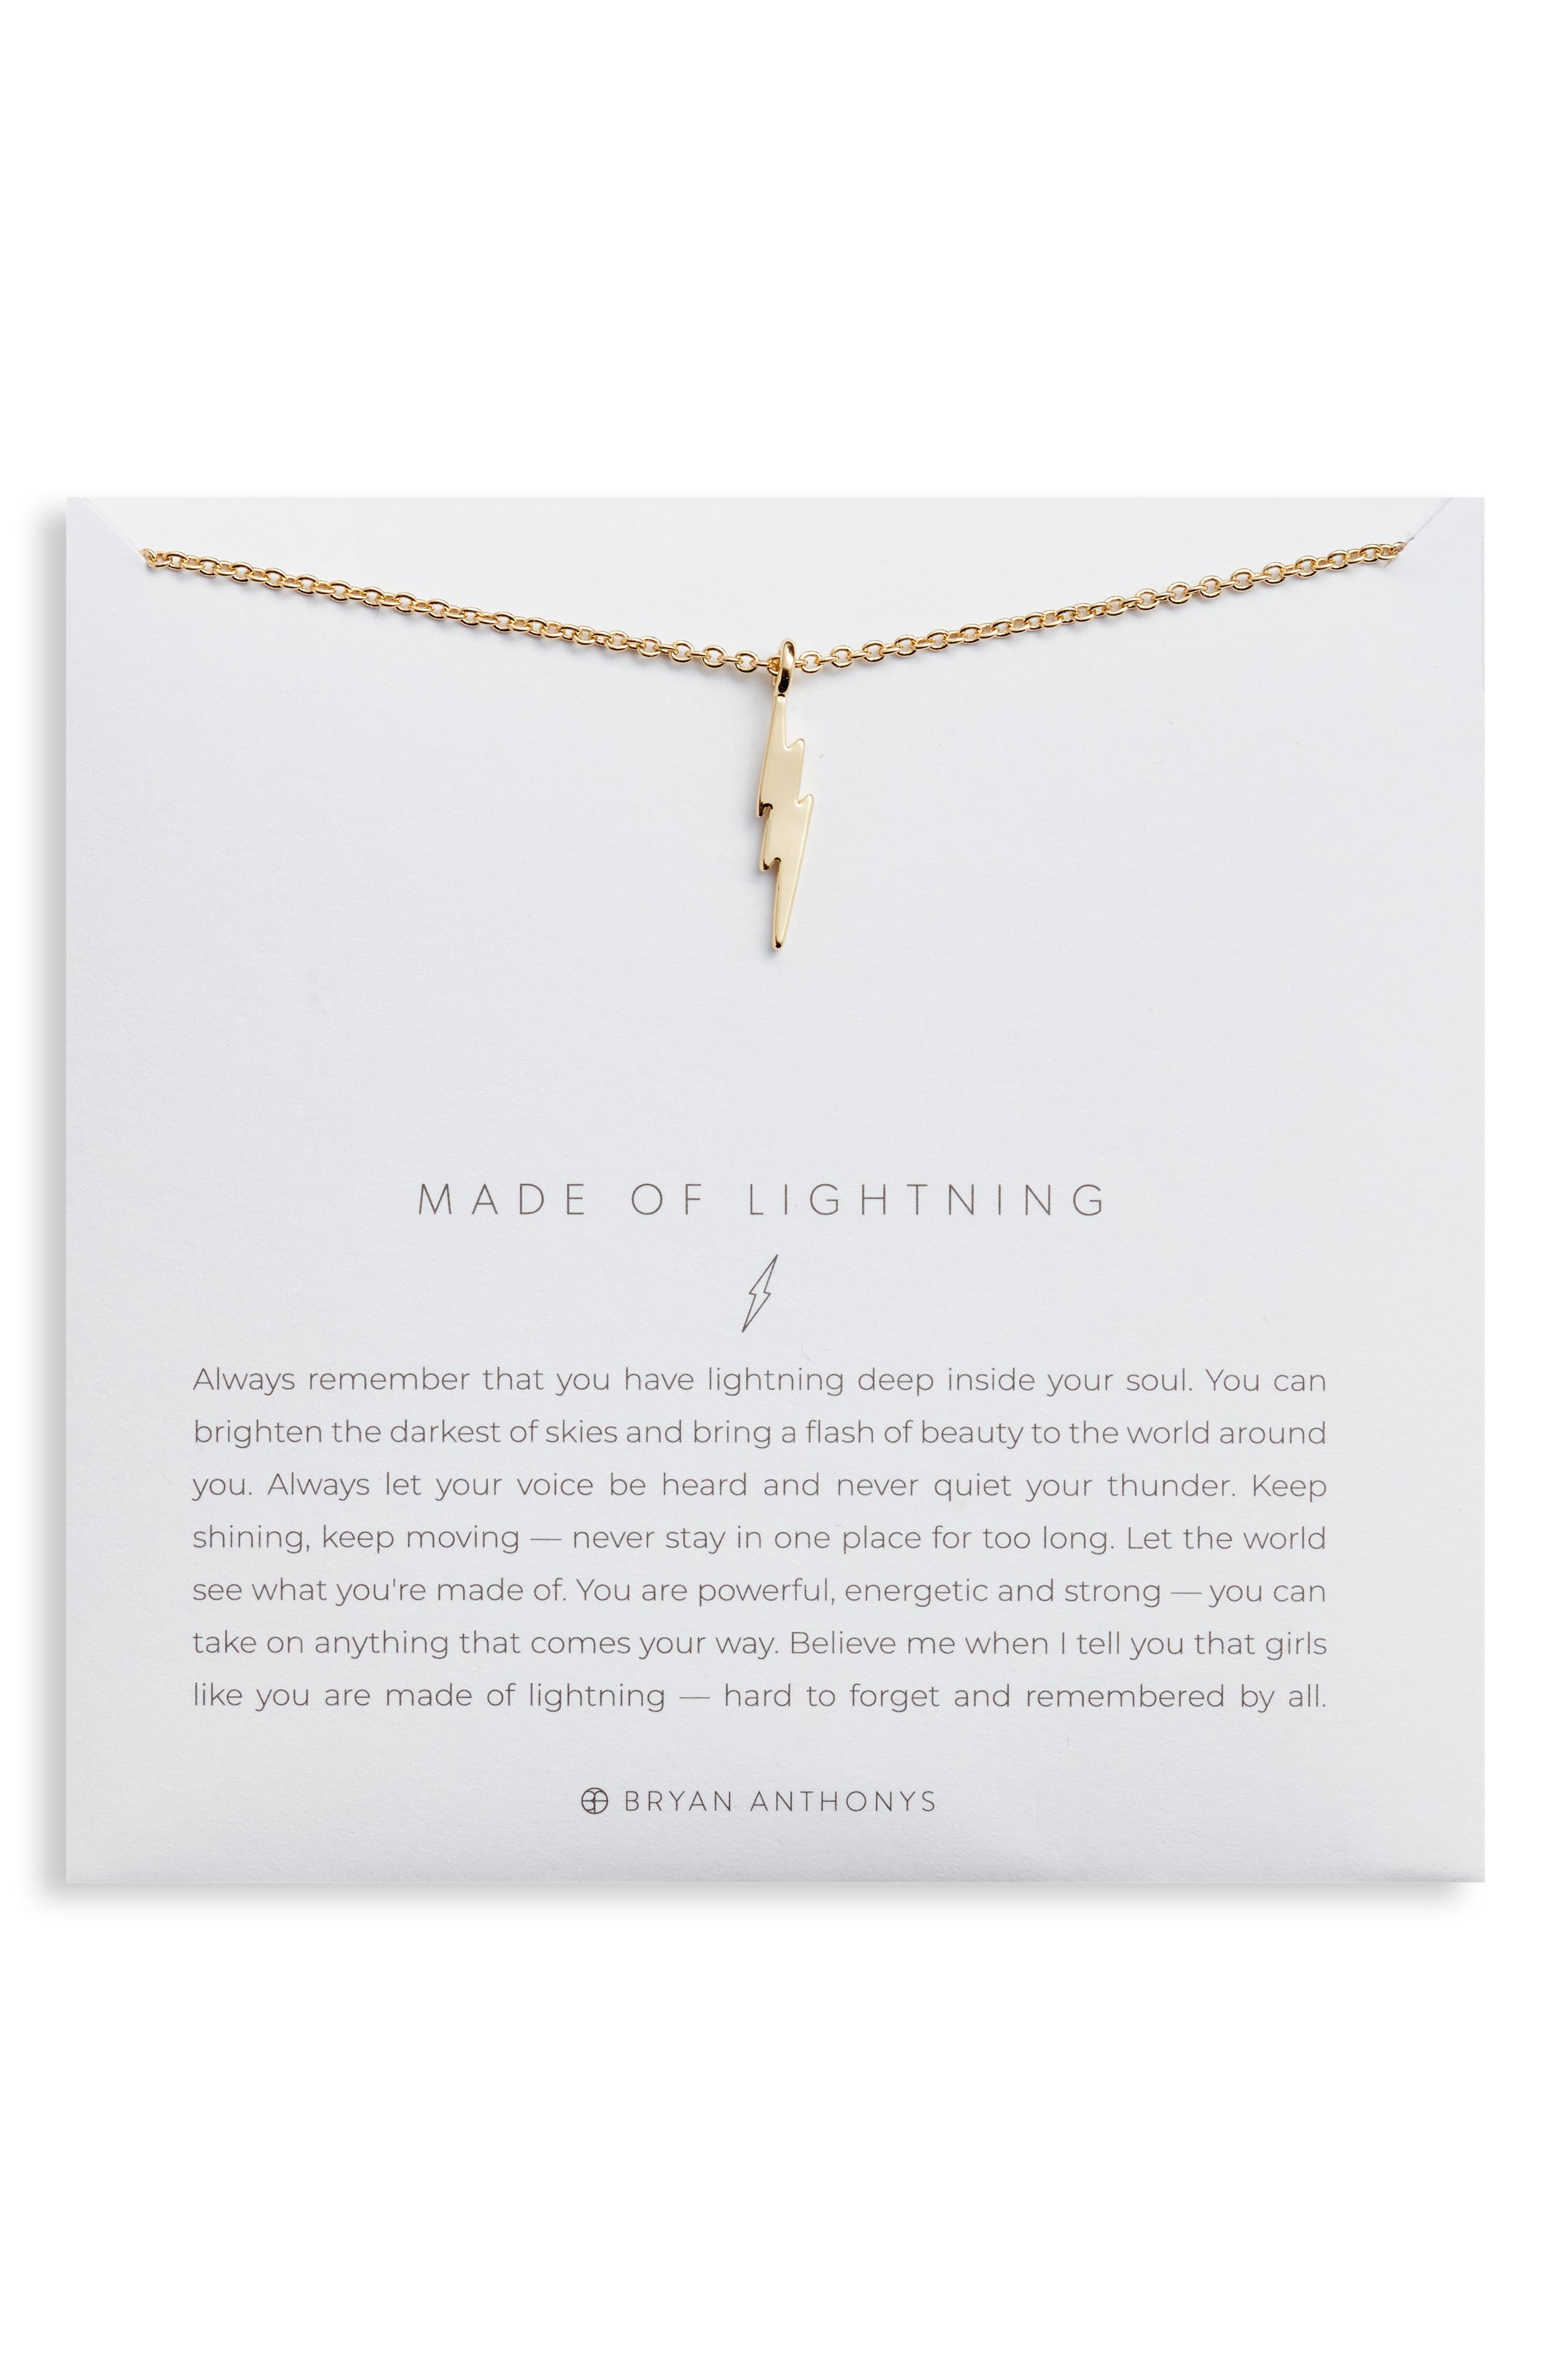 Bryan Anthonys Made of Lightning Pendant Necklace in Gold at Nordstrom